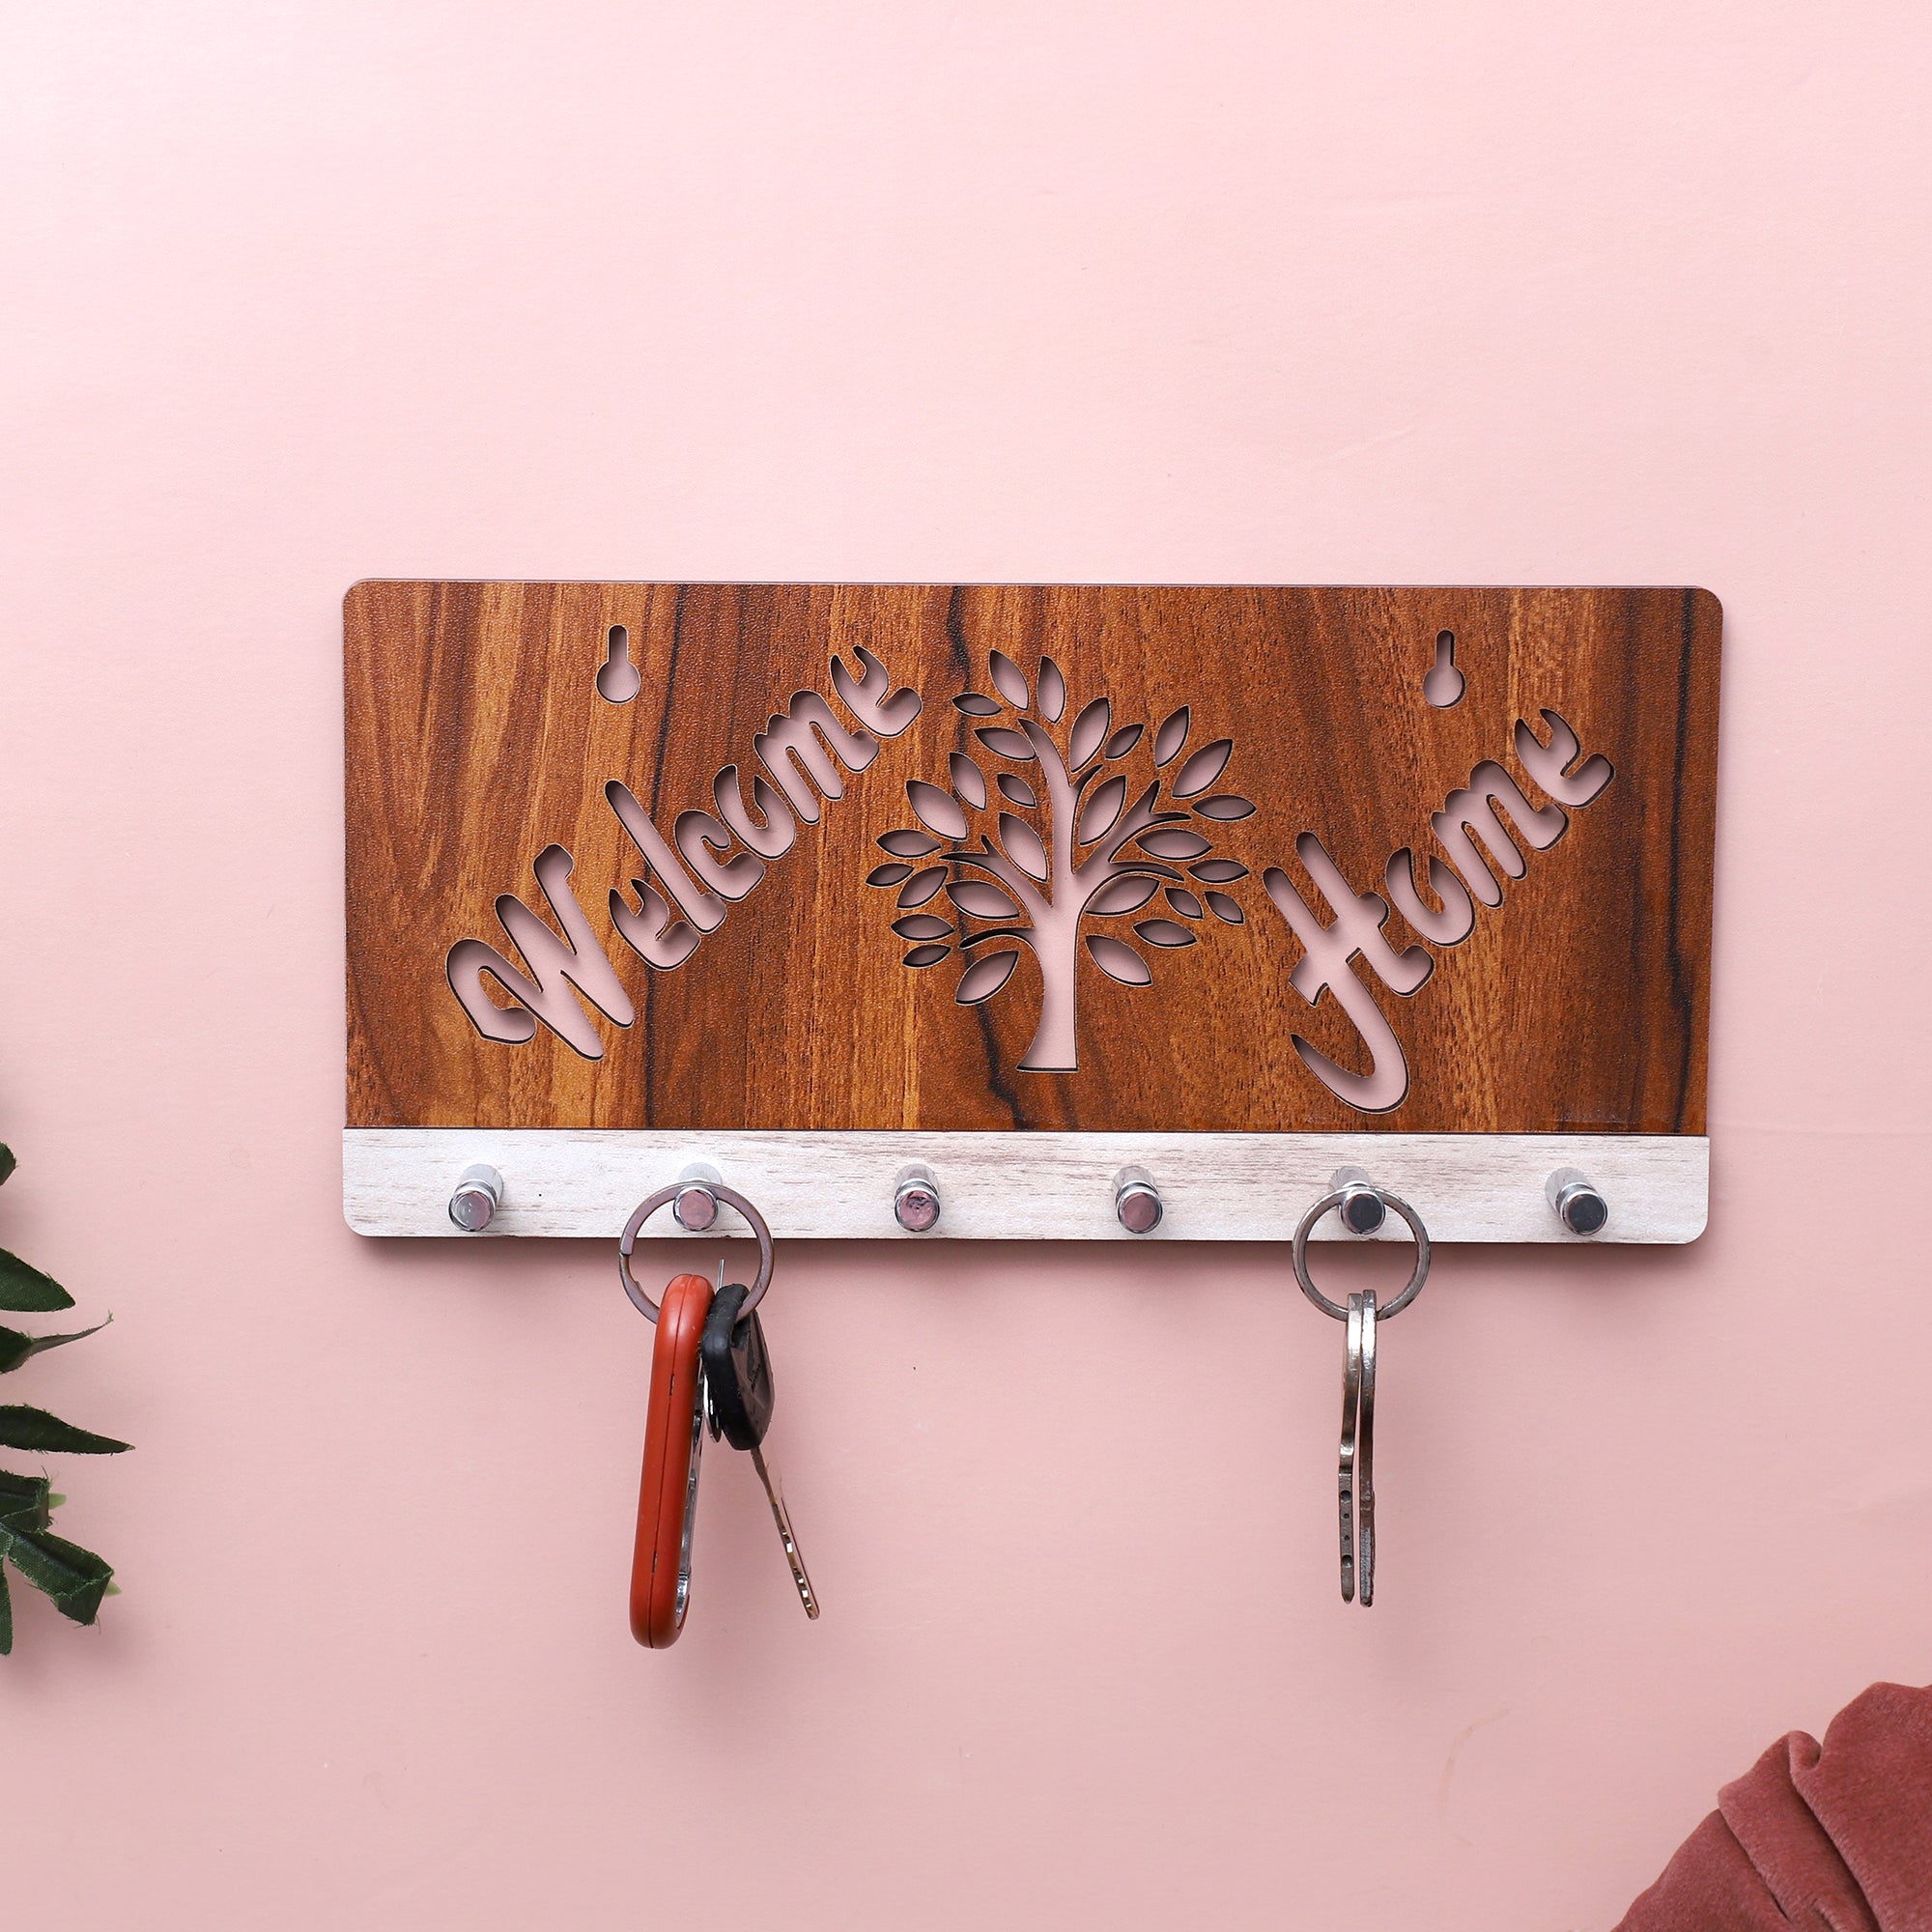 Key Holder with 6 Knob Hooks | Welcome Home Self Adhesive Key Hanger for Home and Office Decoration No Drill Required